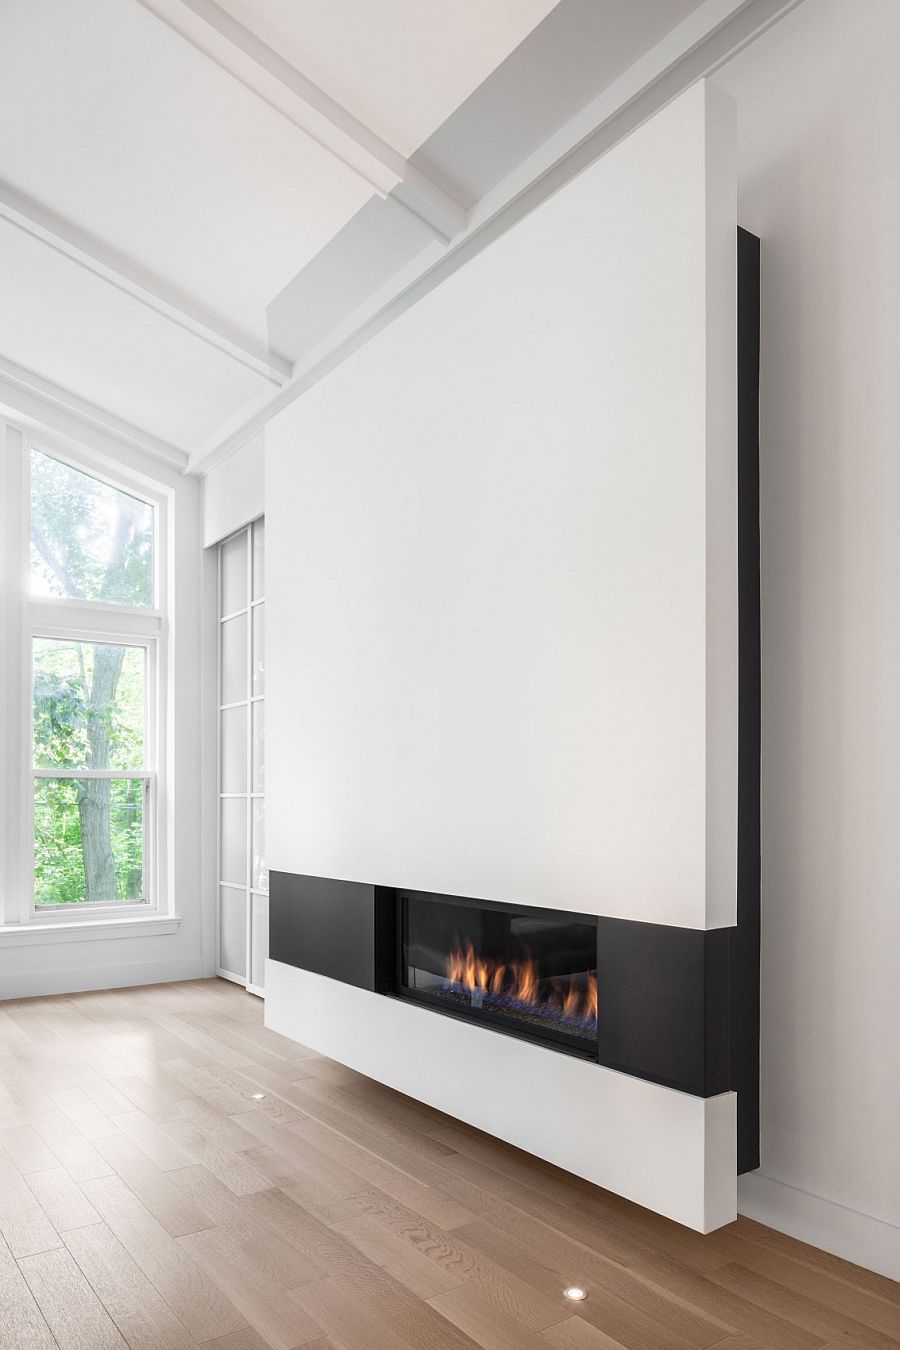 Fabulous, sleek fireplace adds to the appeal of the contemporary addition